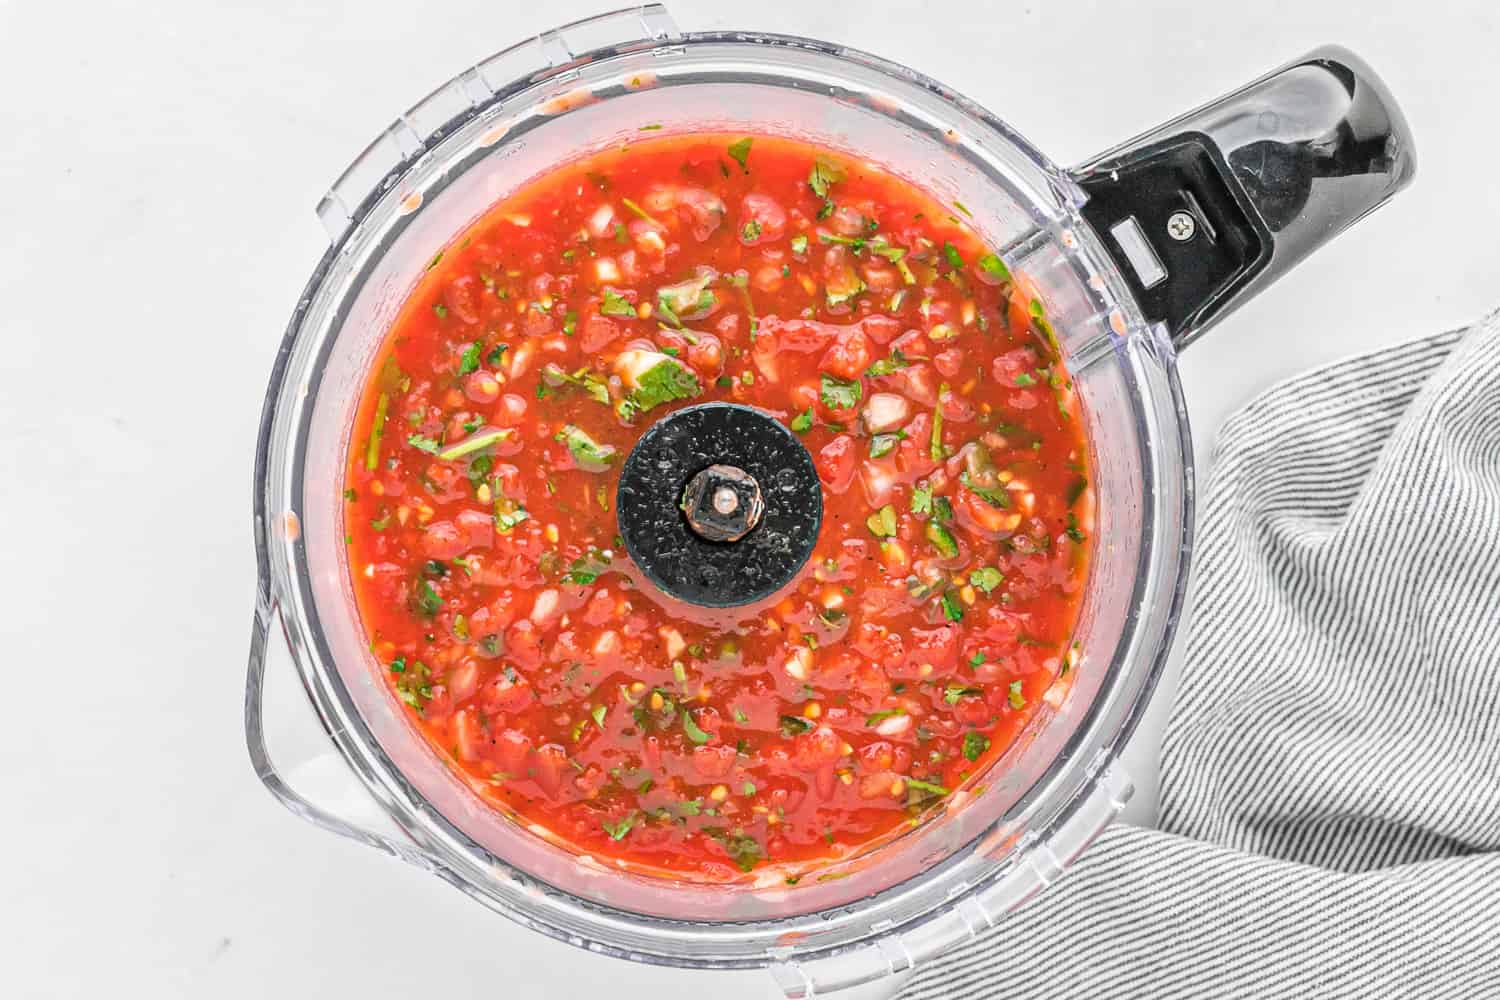 Salsa in a food processor with black handle.